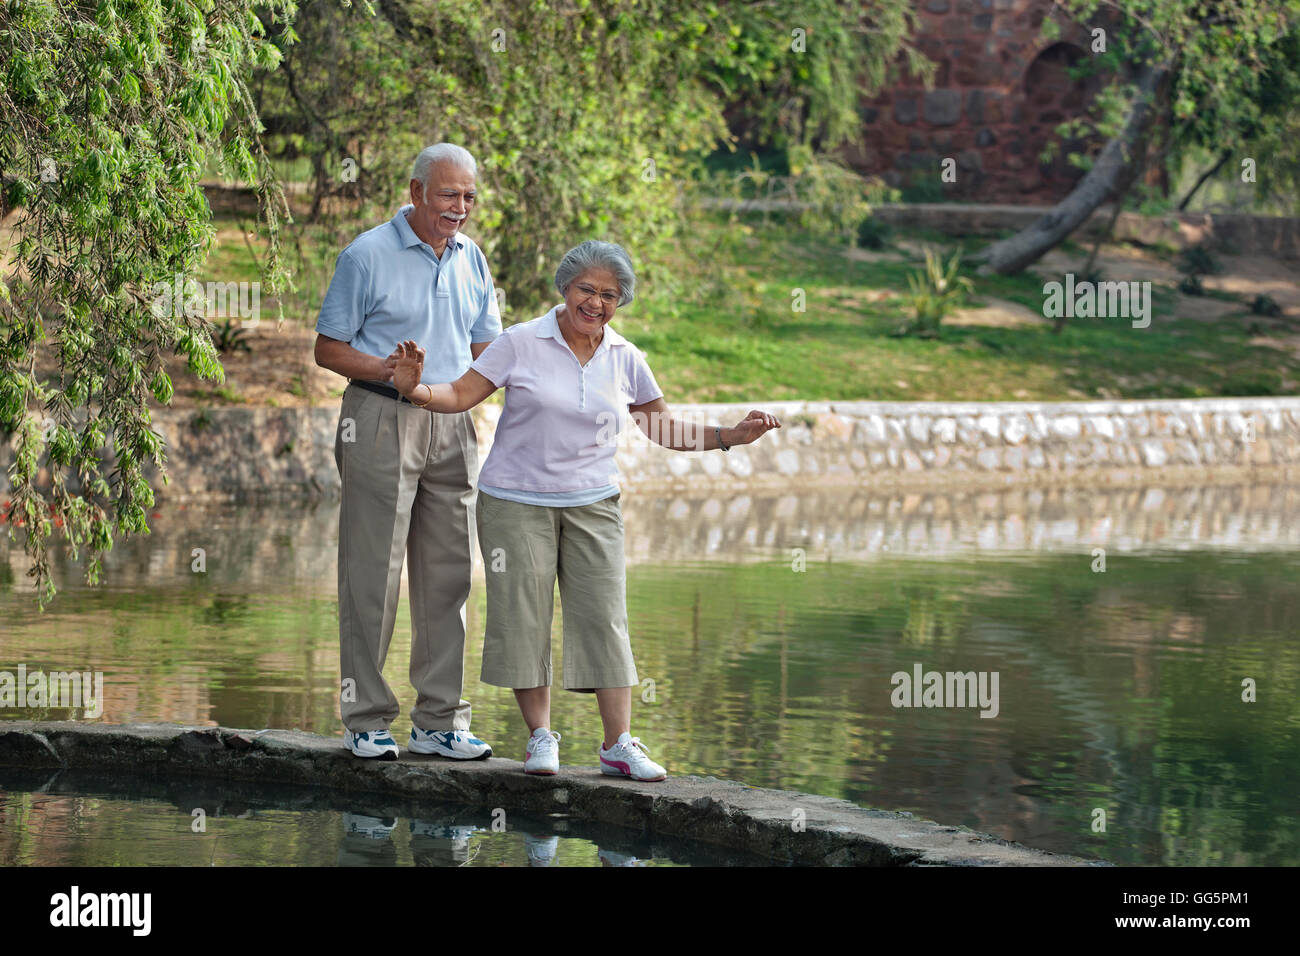 Careful mature woman balancing while walking with man in park Stock Photo